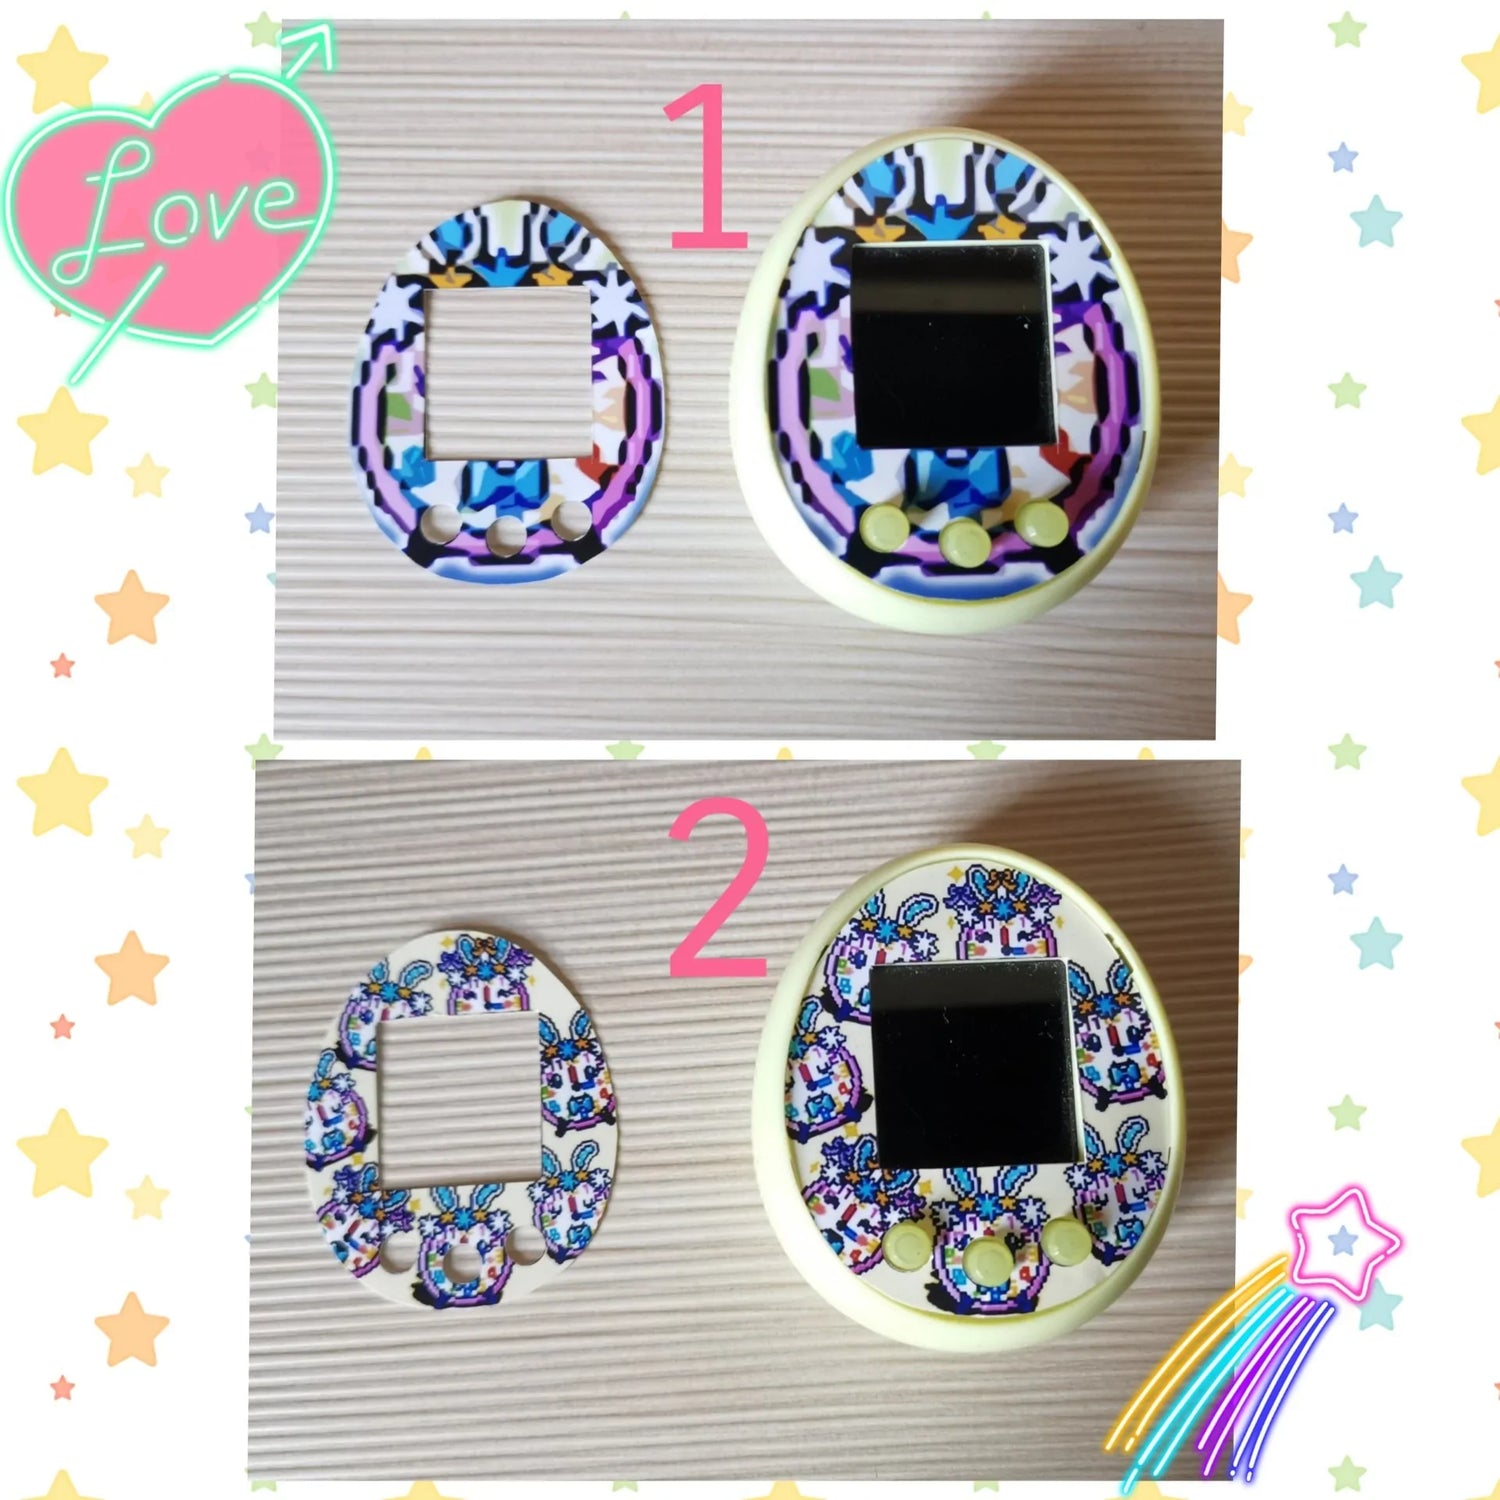 Tamagotchi Meets/On Faceplates - Clock face Fuzzy N Chic